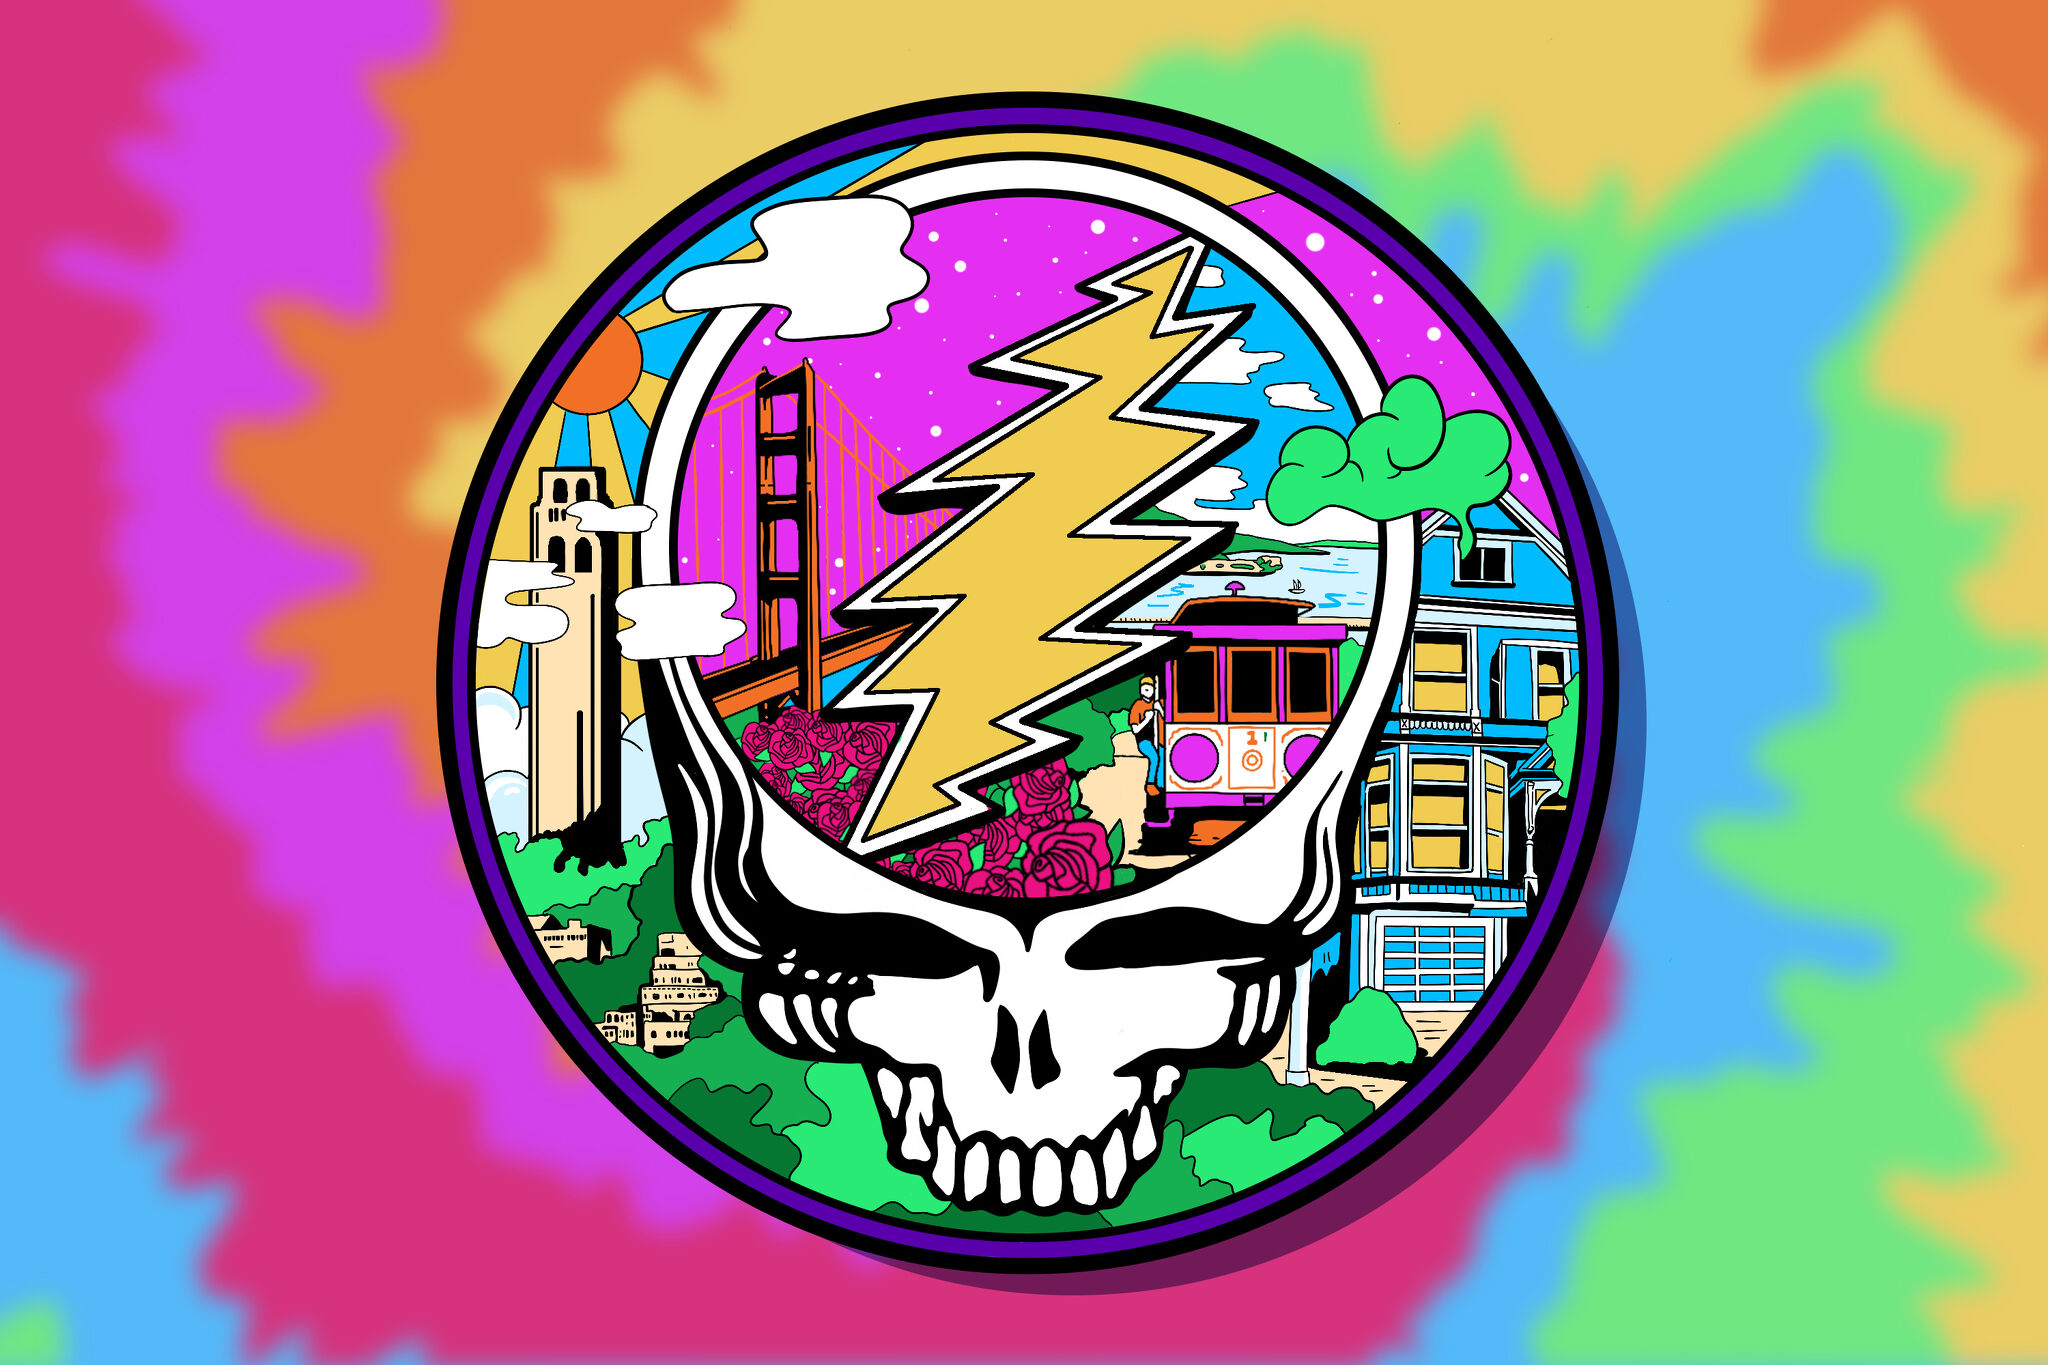 A San Francisco map of where Grateful Dead lived, worked and played